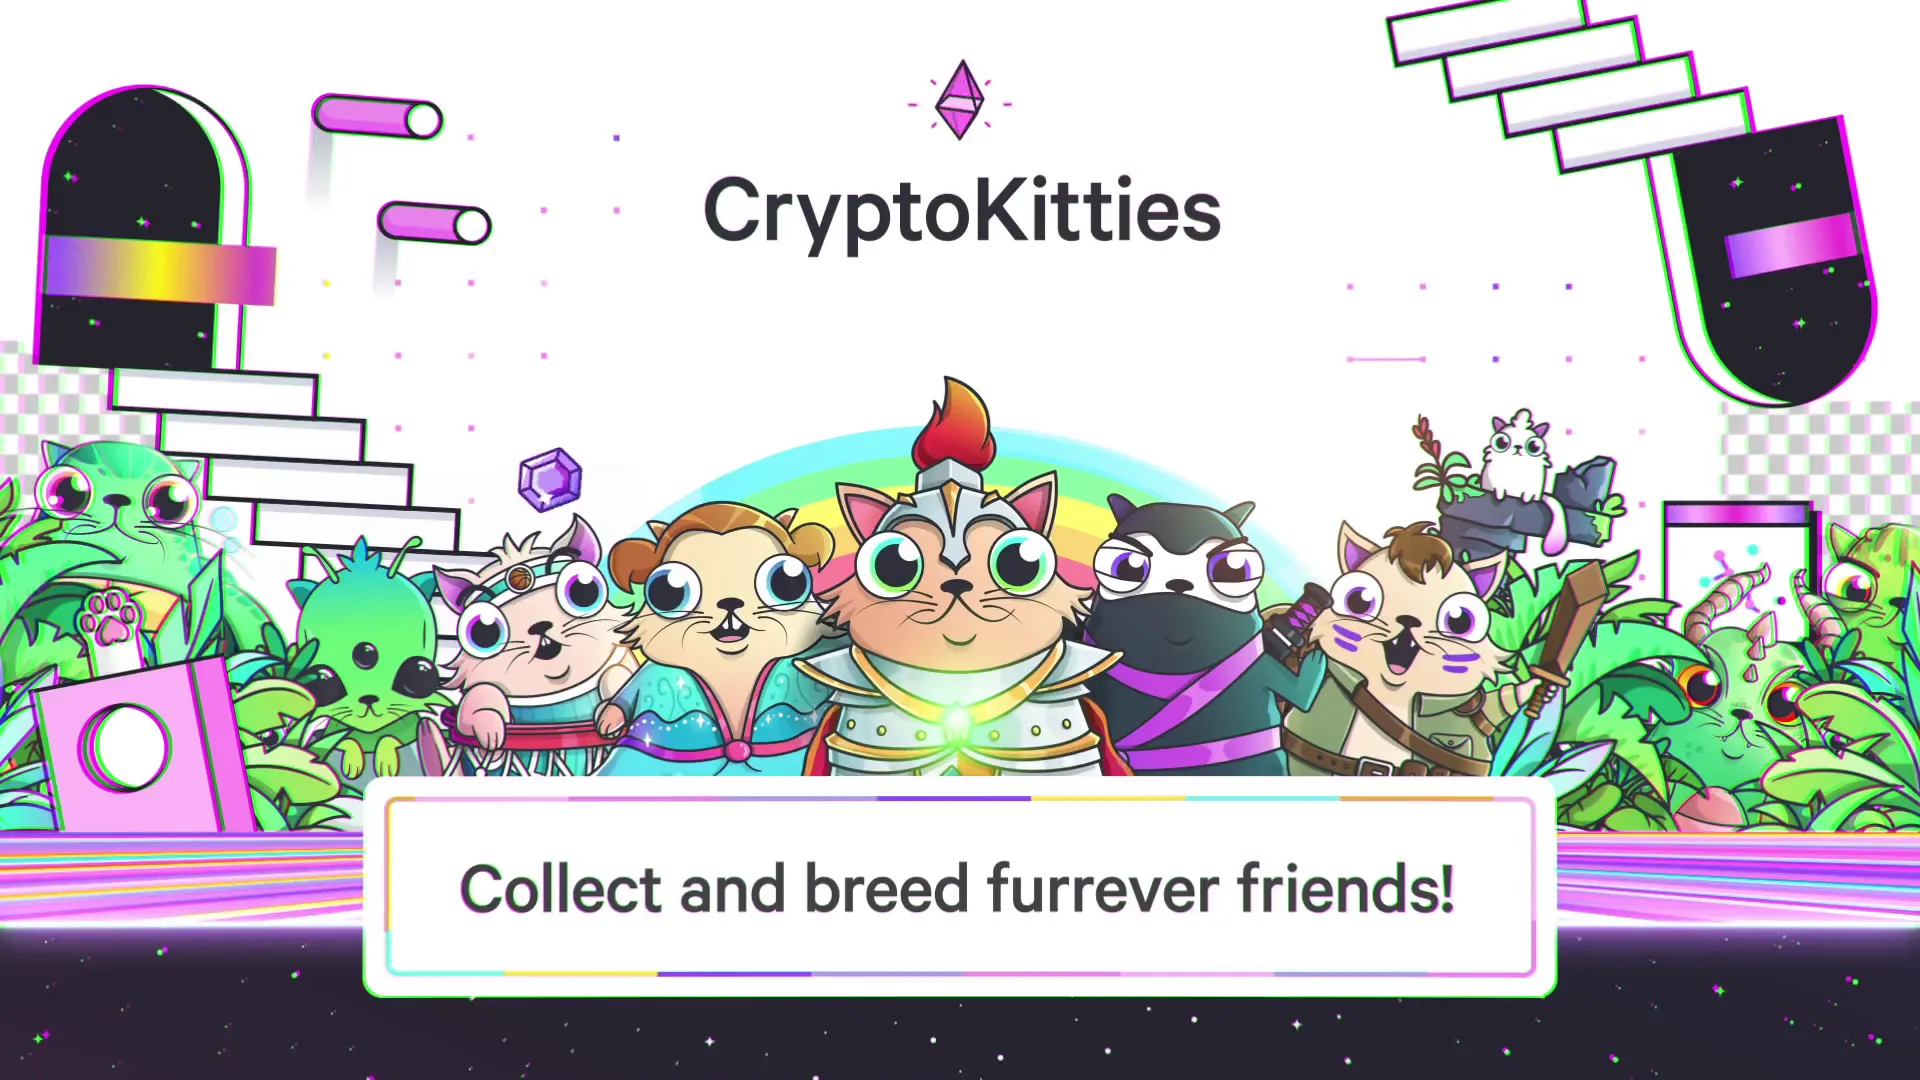 A vibrant poster from CryptoKitties showcases an array of adorable, unique kitties that players can purchase, collect, and breed within the game.